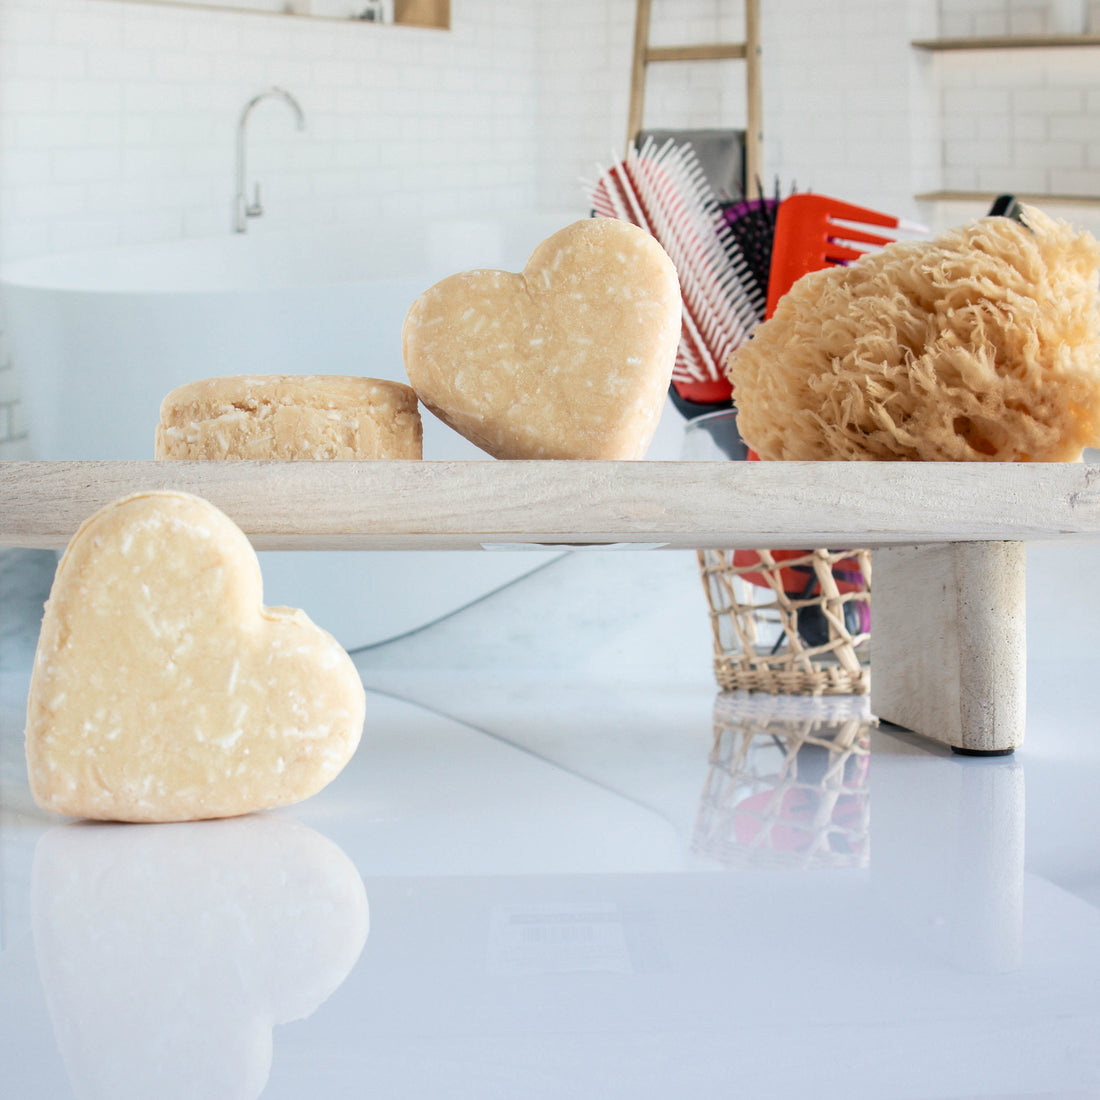 3 light yellow zesty cedarwood shampoo bars shaped in a heart. One is leaning on its side while the other two are on a trey, one leaning on the other. there is a loofah next to them with a cup of hair tools in the background